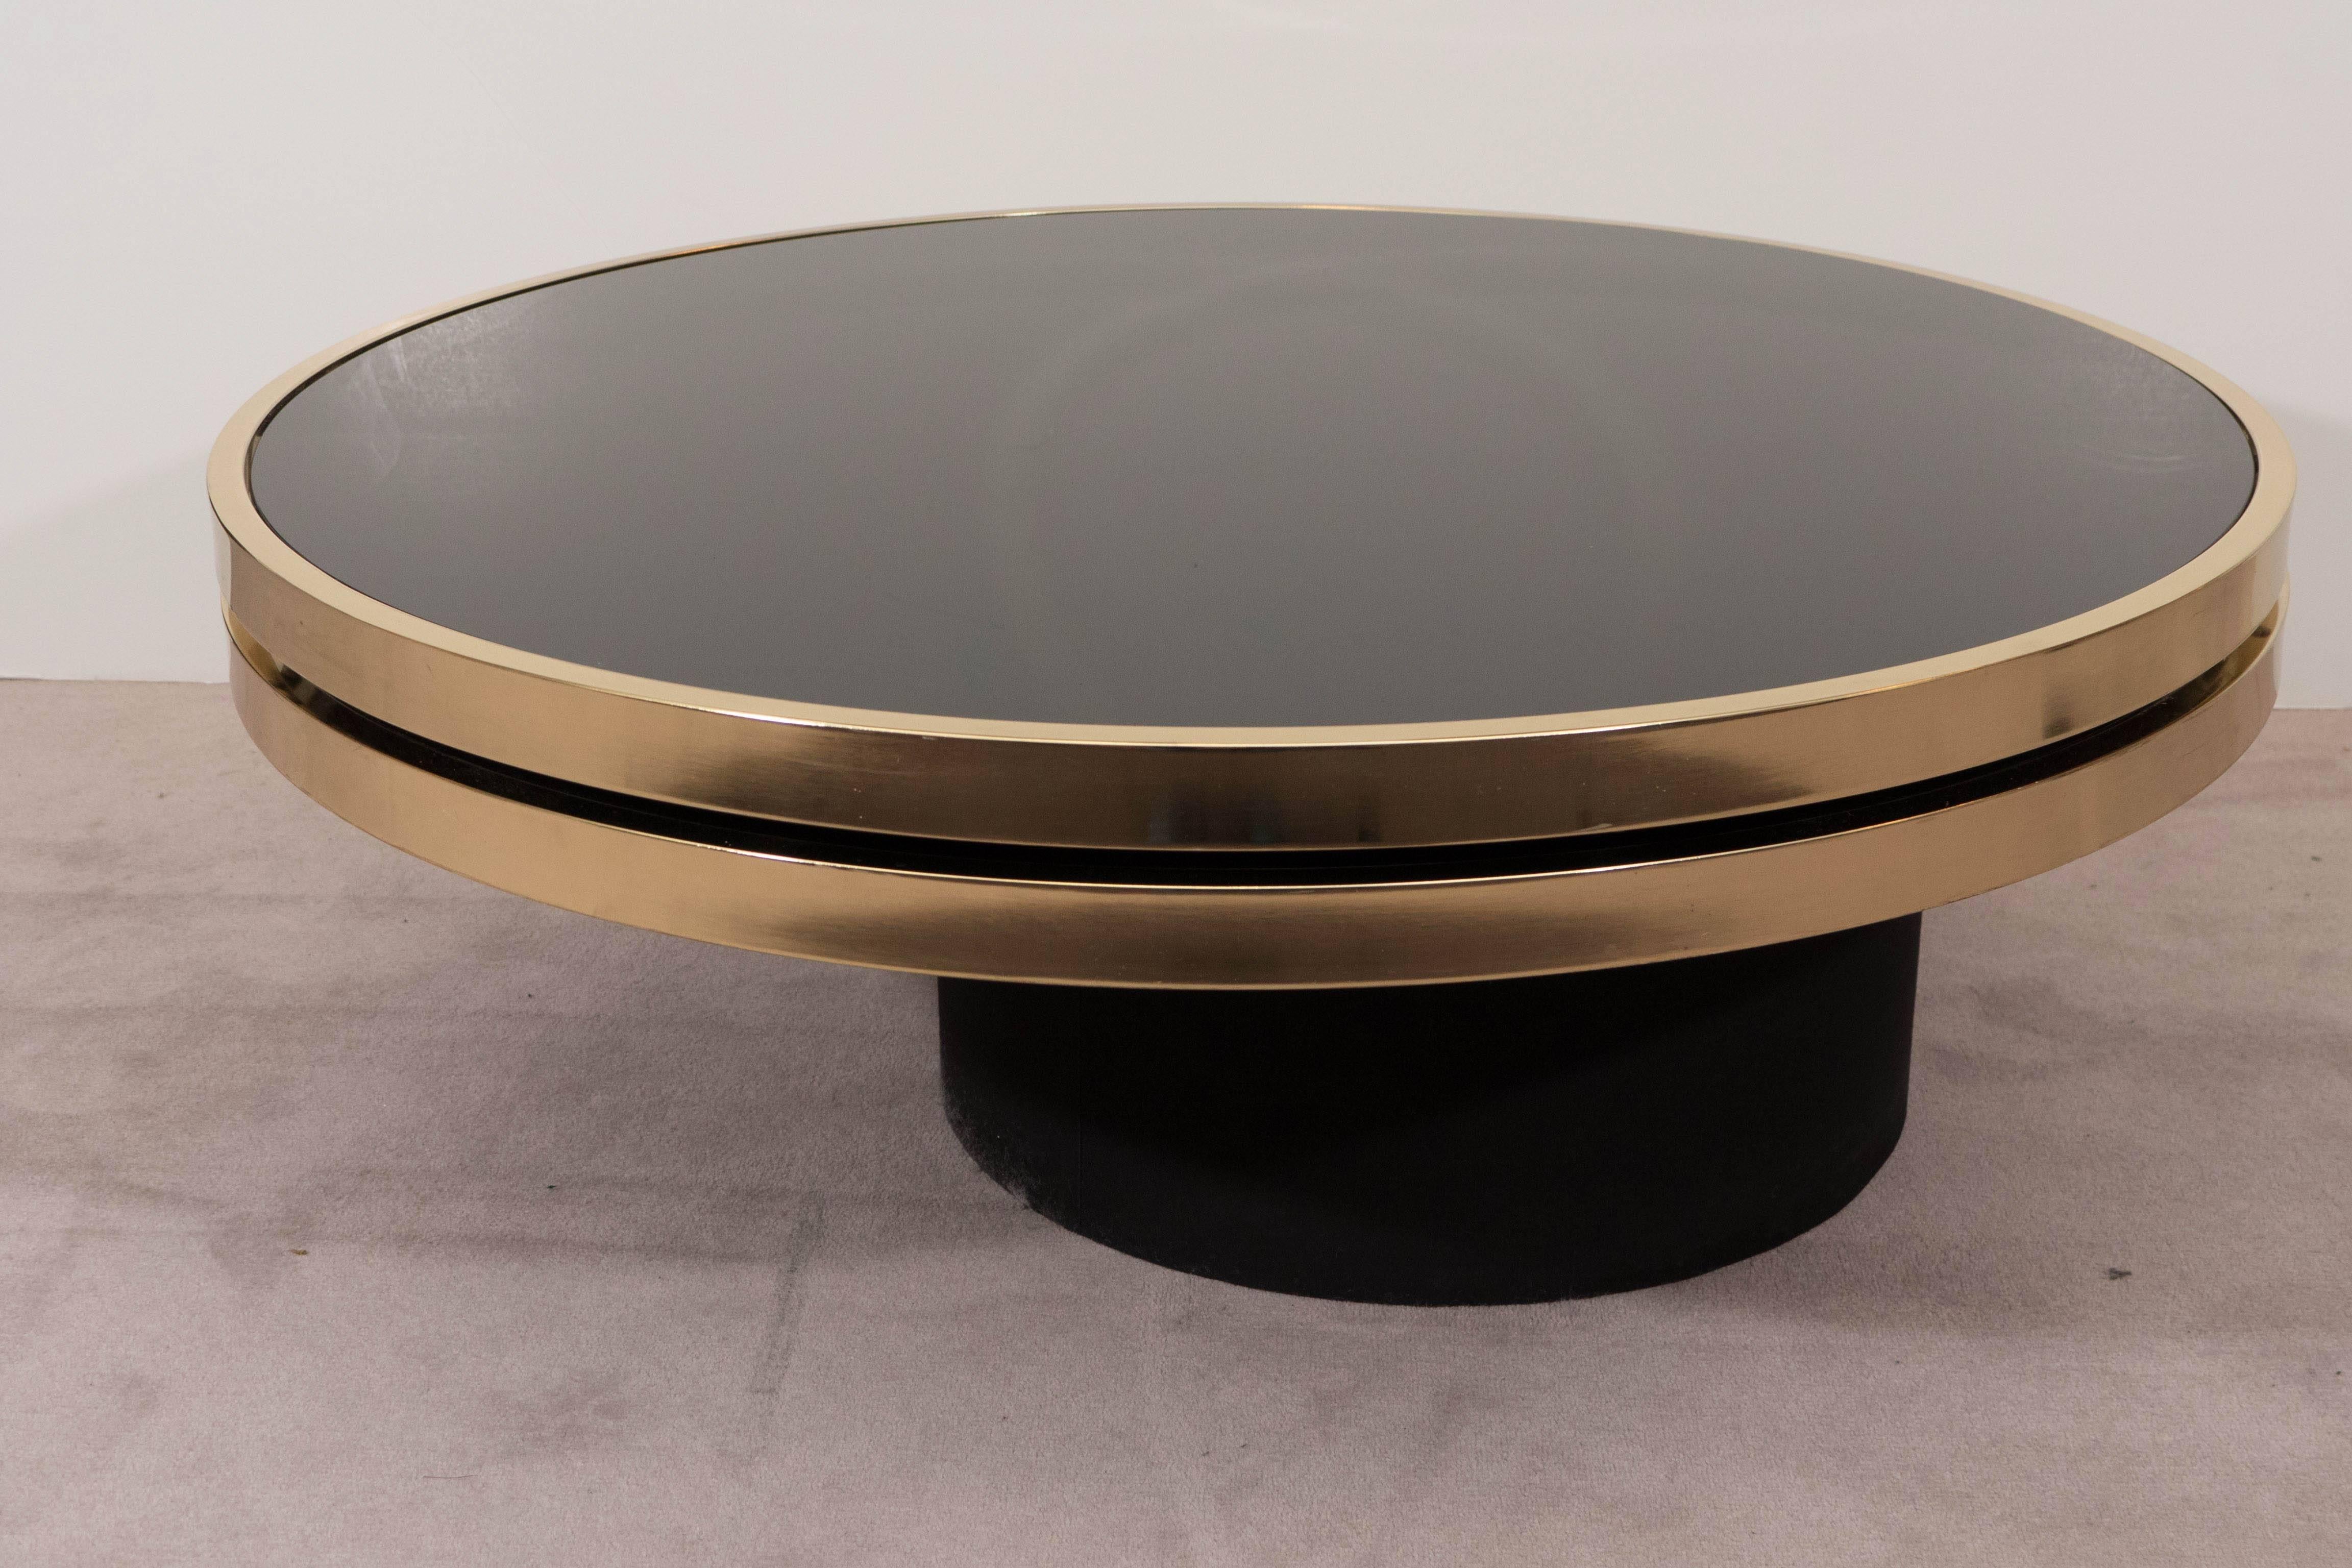 Late 20th Century Black Glass and Brass Swivel Cocktail Table by the Design Institute of America